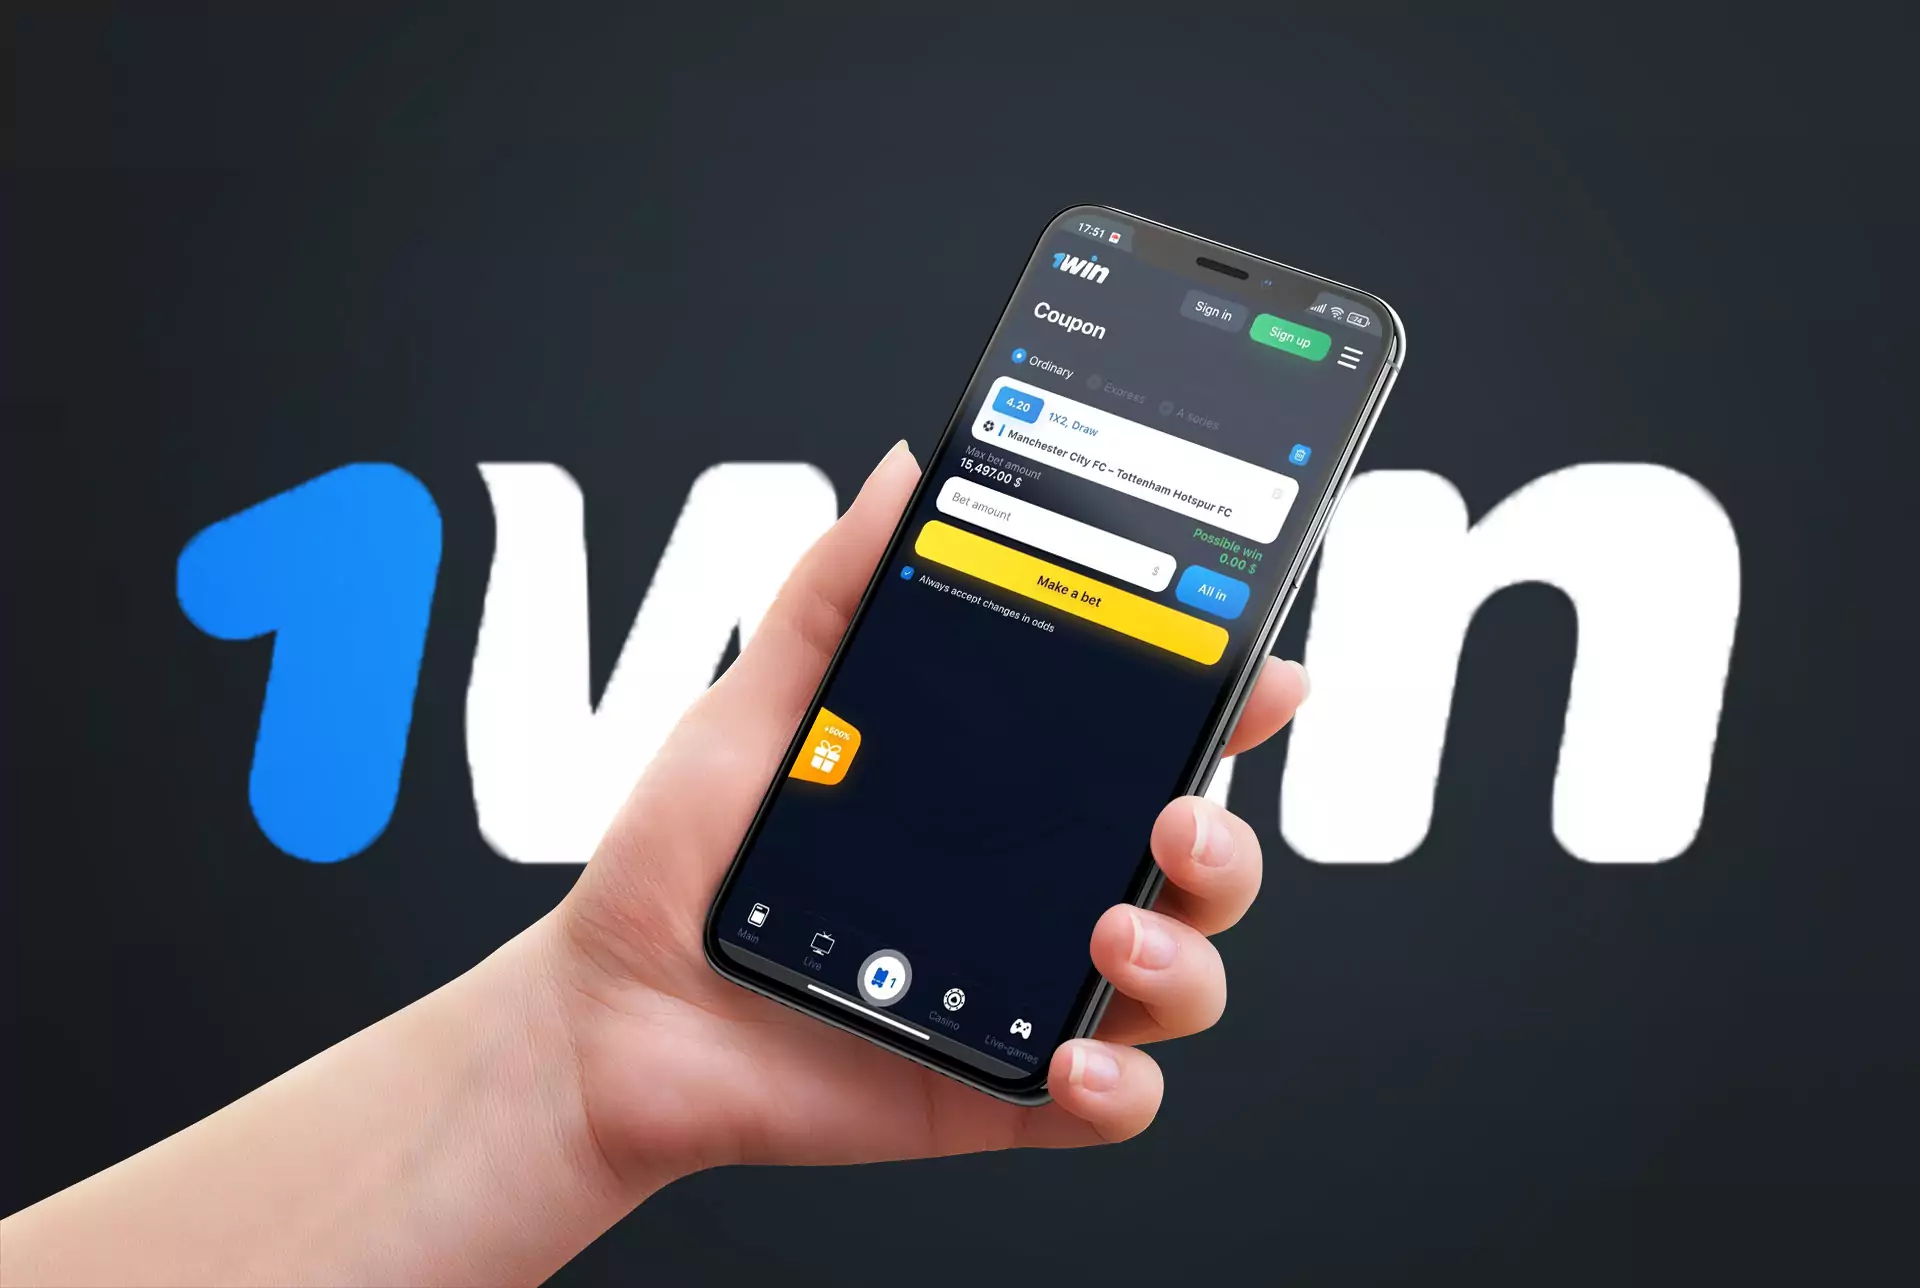 The 1win app is available on Android and iOS devices.